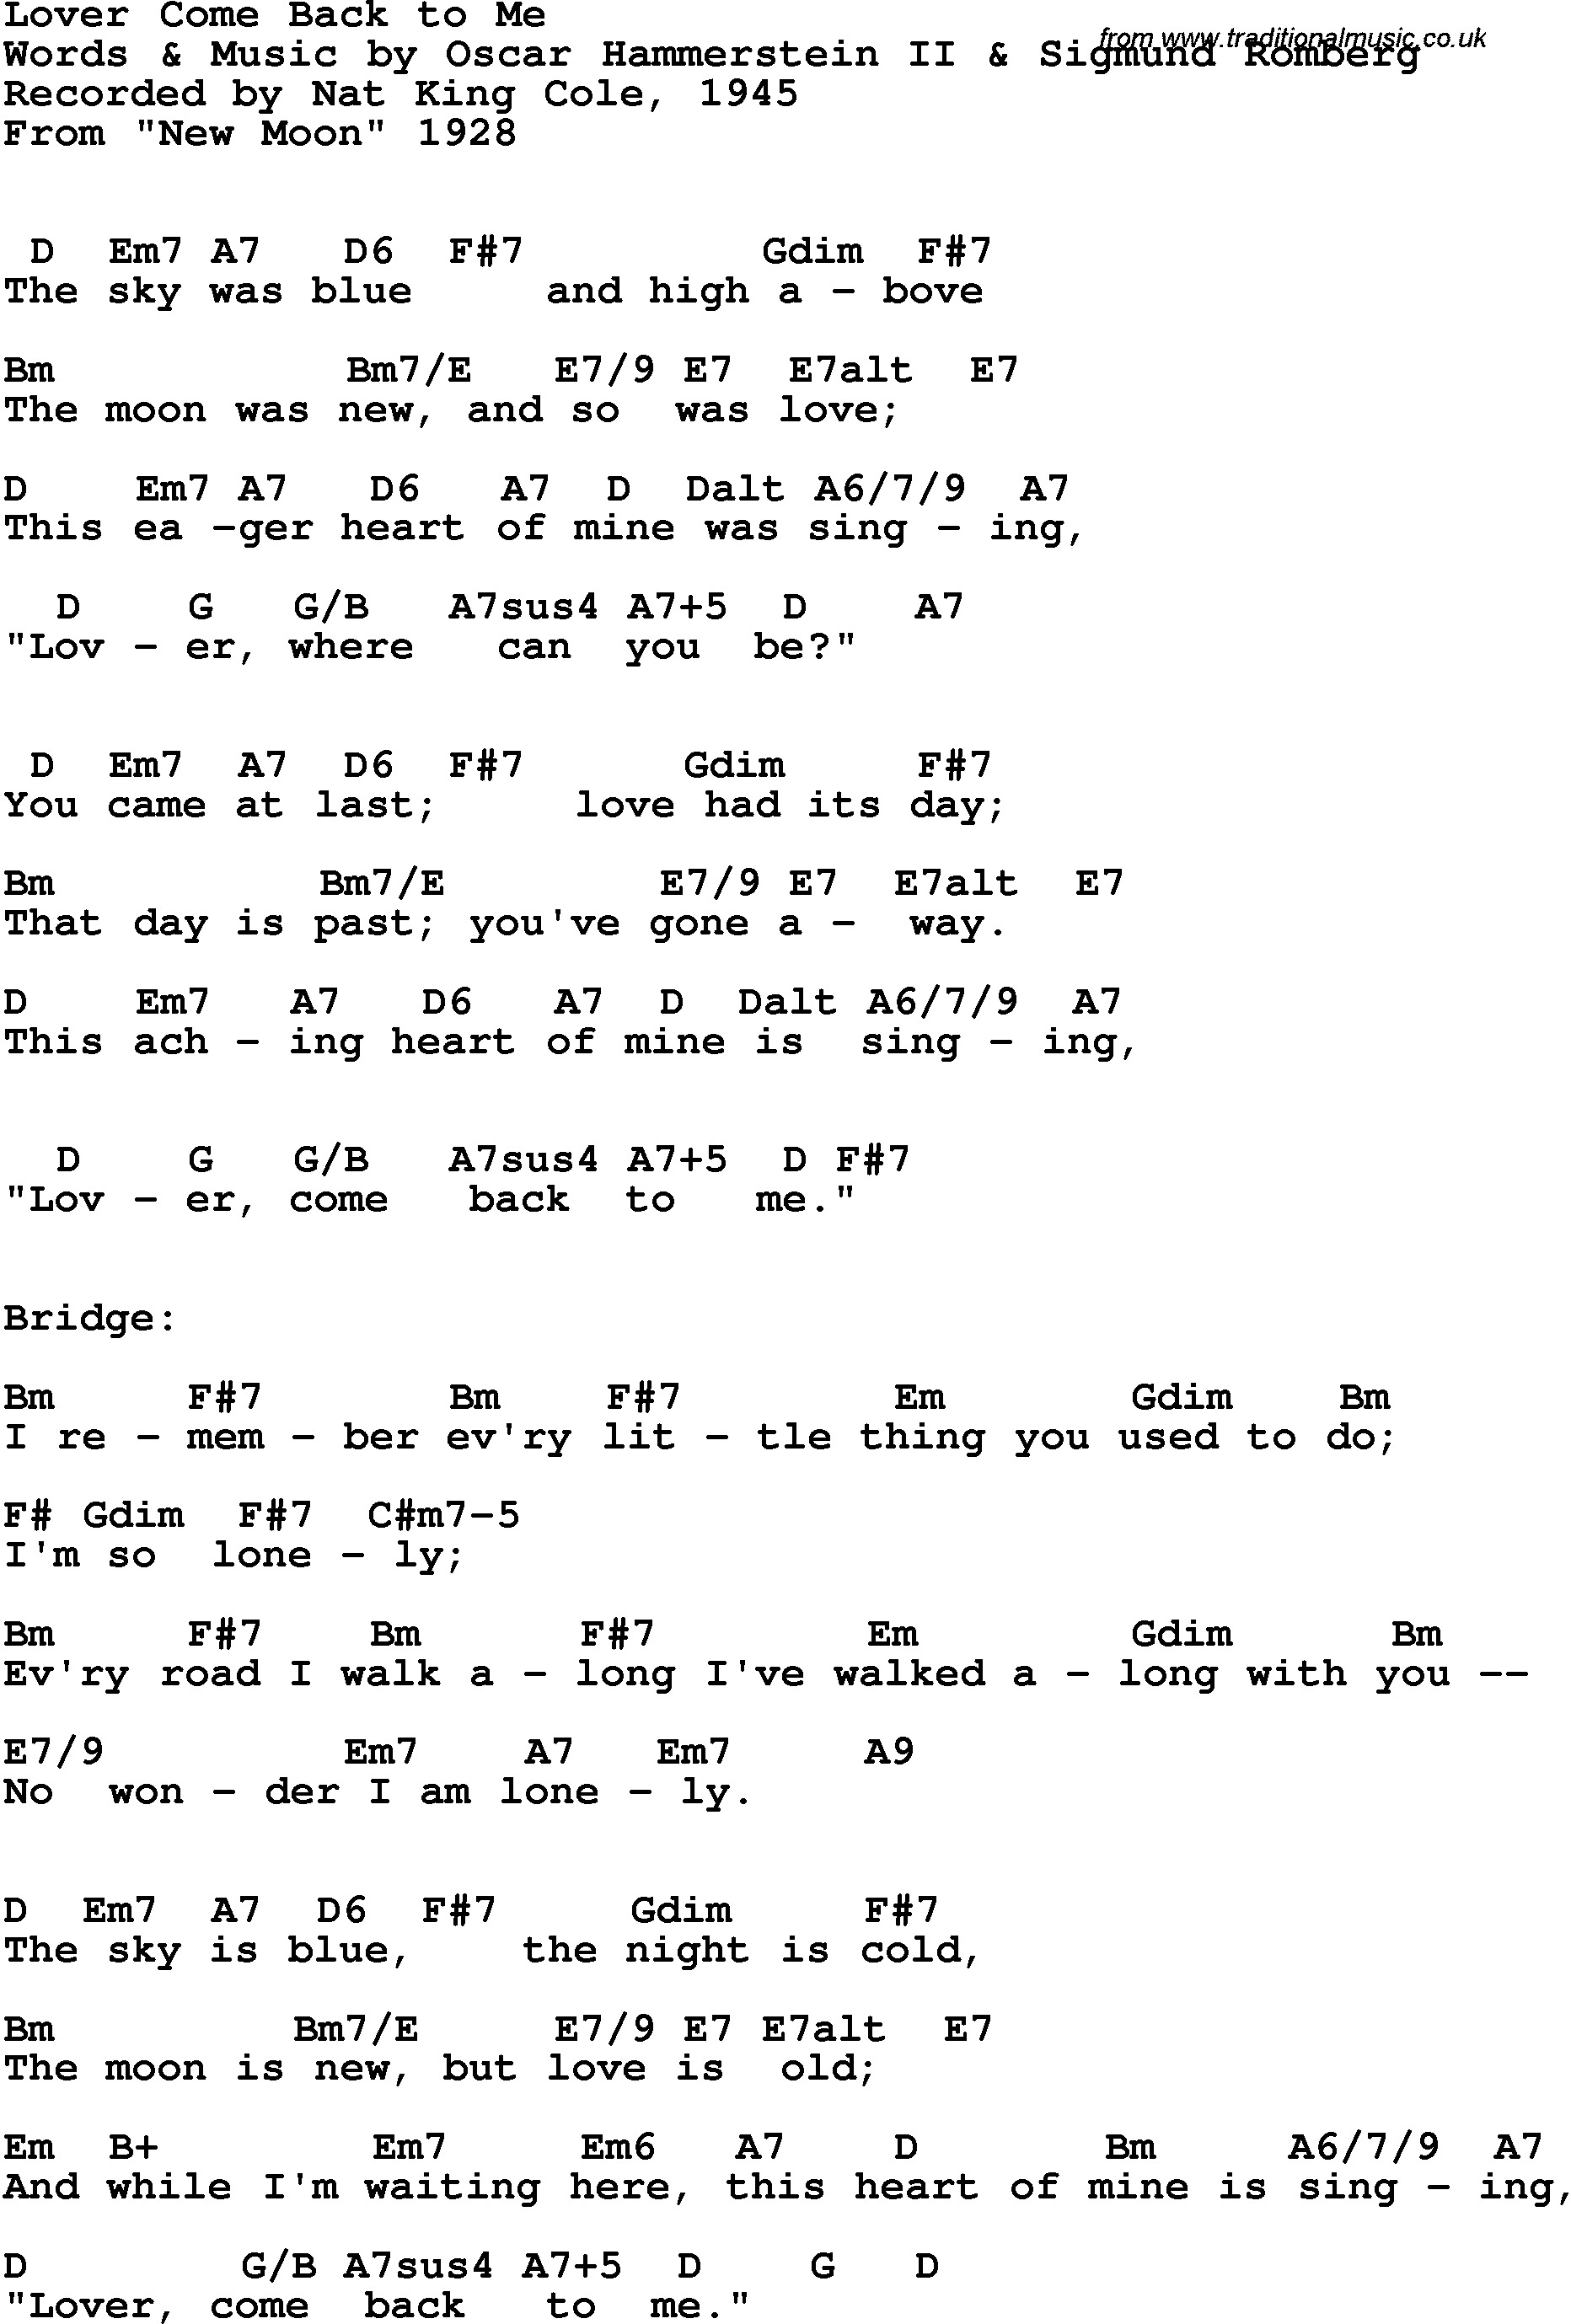 Song Lyrics with guitar chords for Lover Come Back To Me - Nat King Cole, 1945